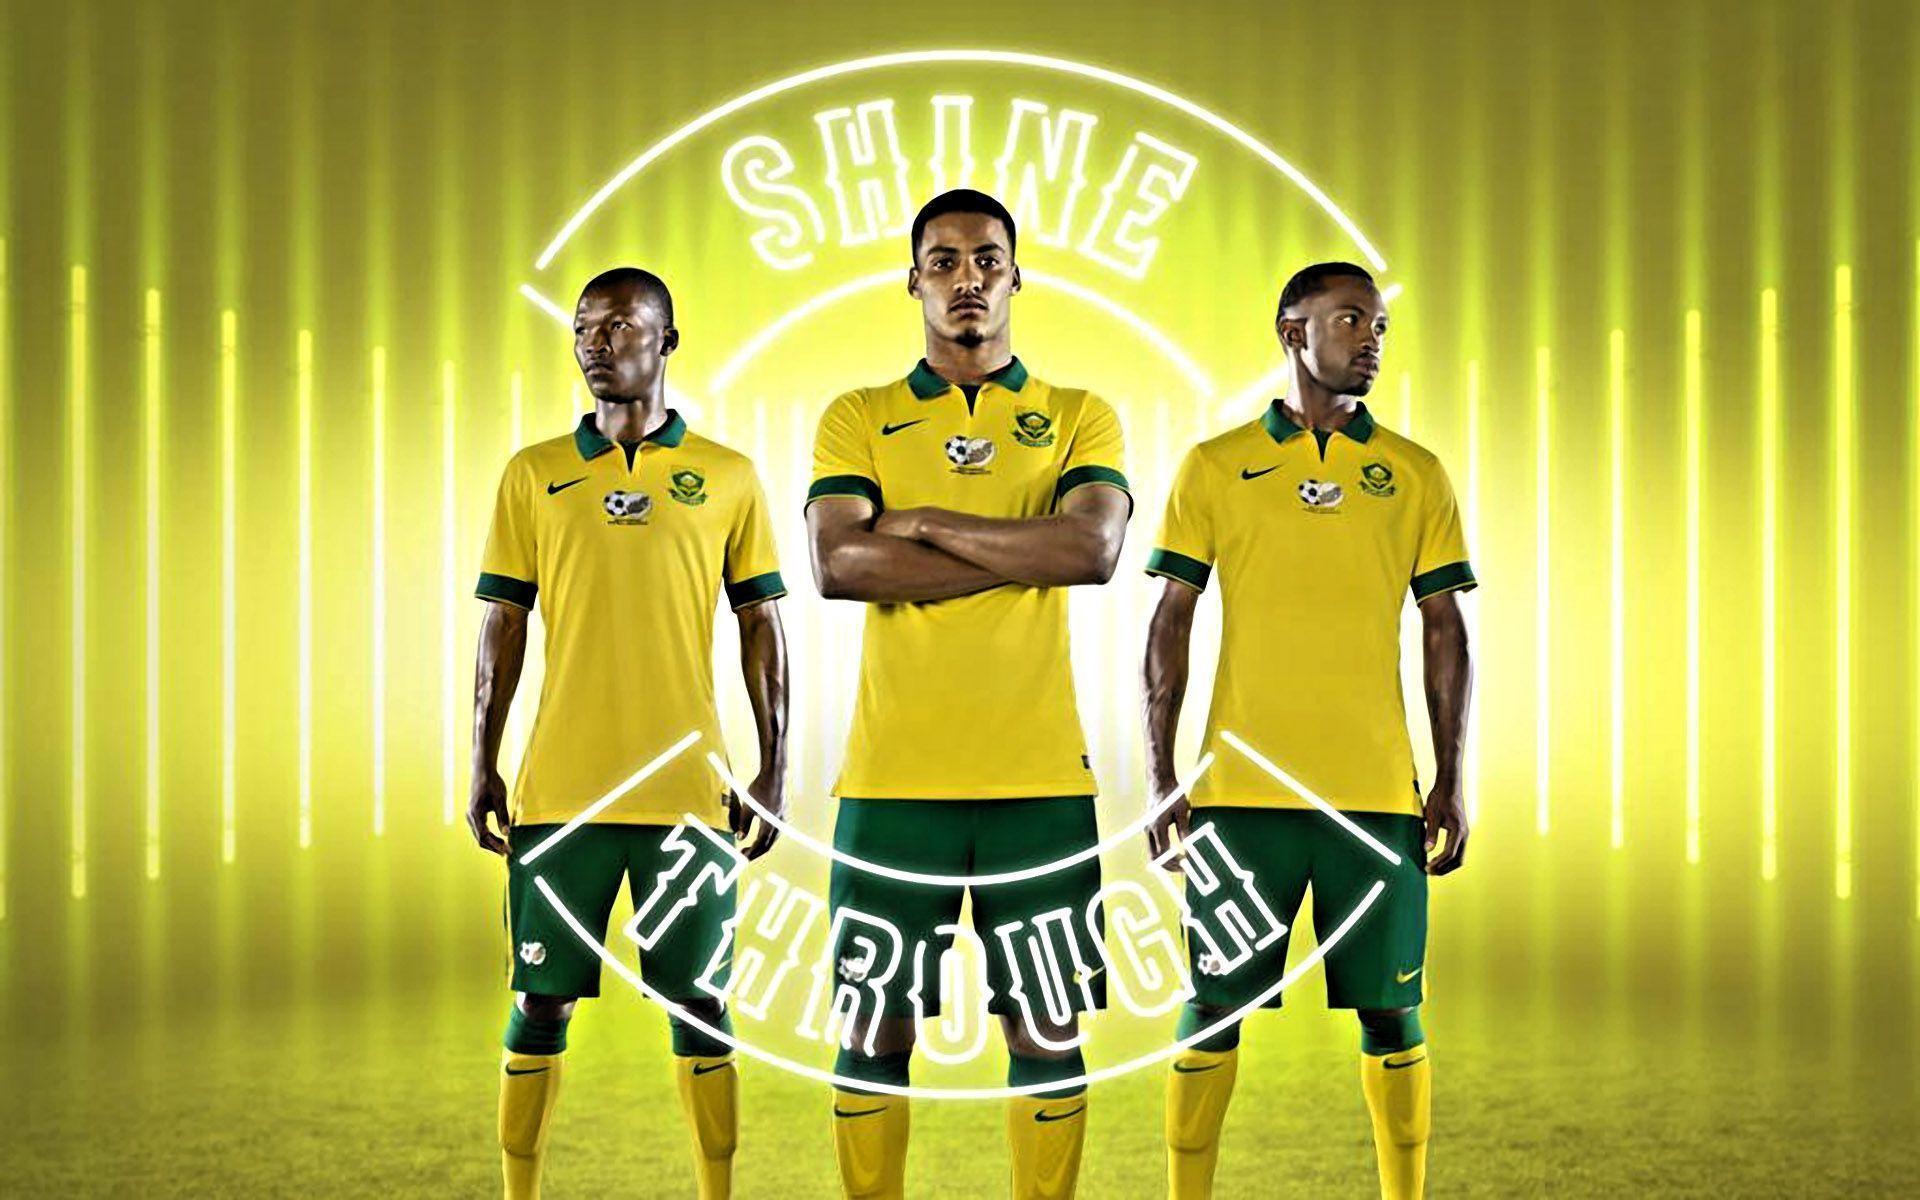 South Africa 2015 Nike Home Shirt Wallpaper Wide or HD. Sports